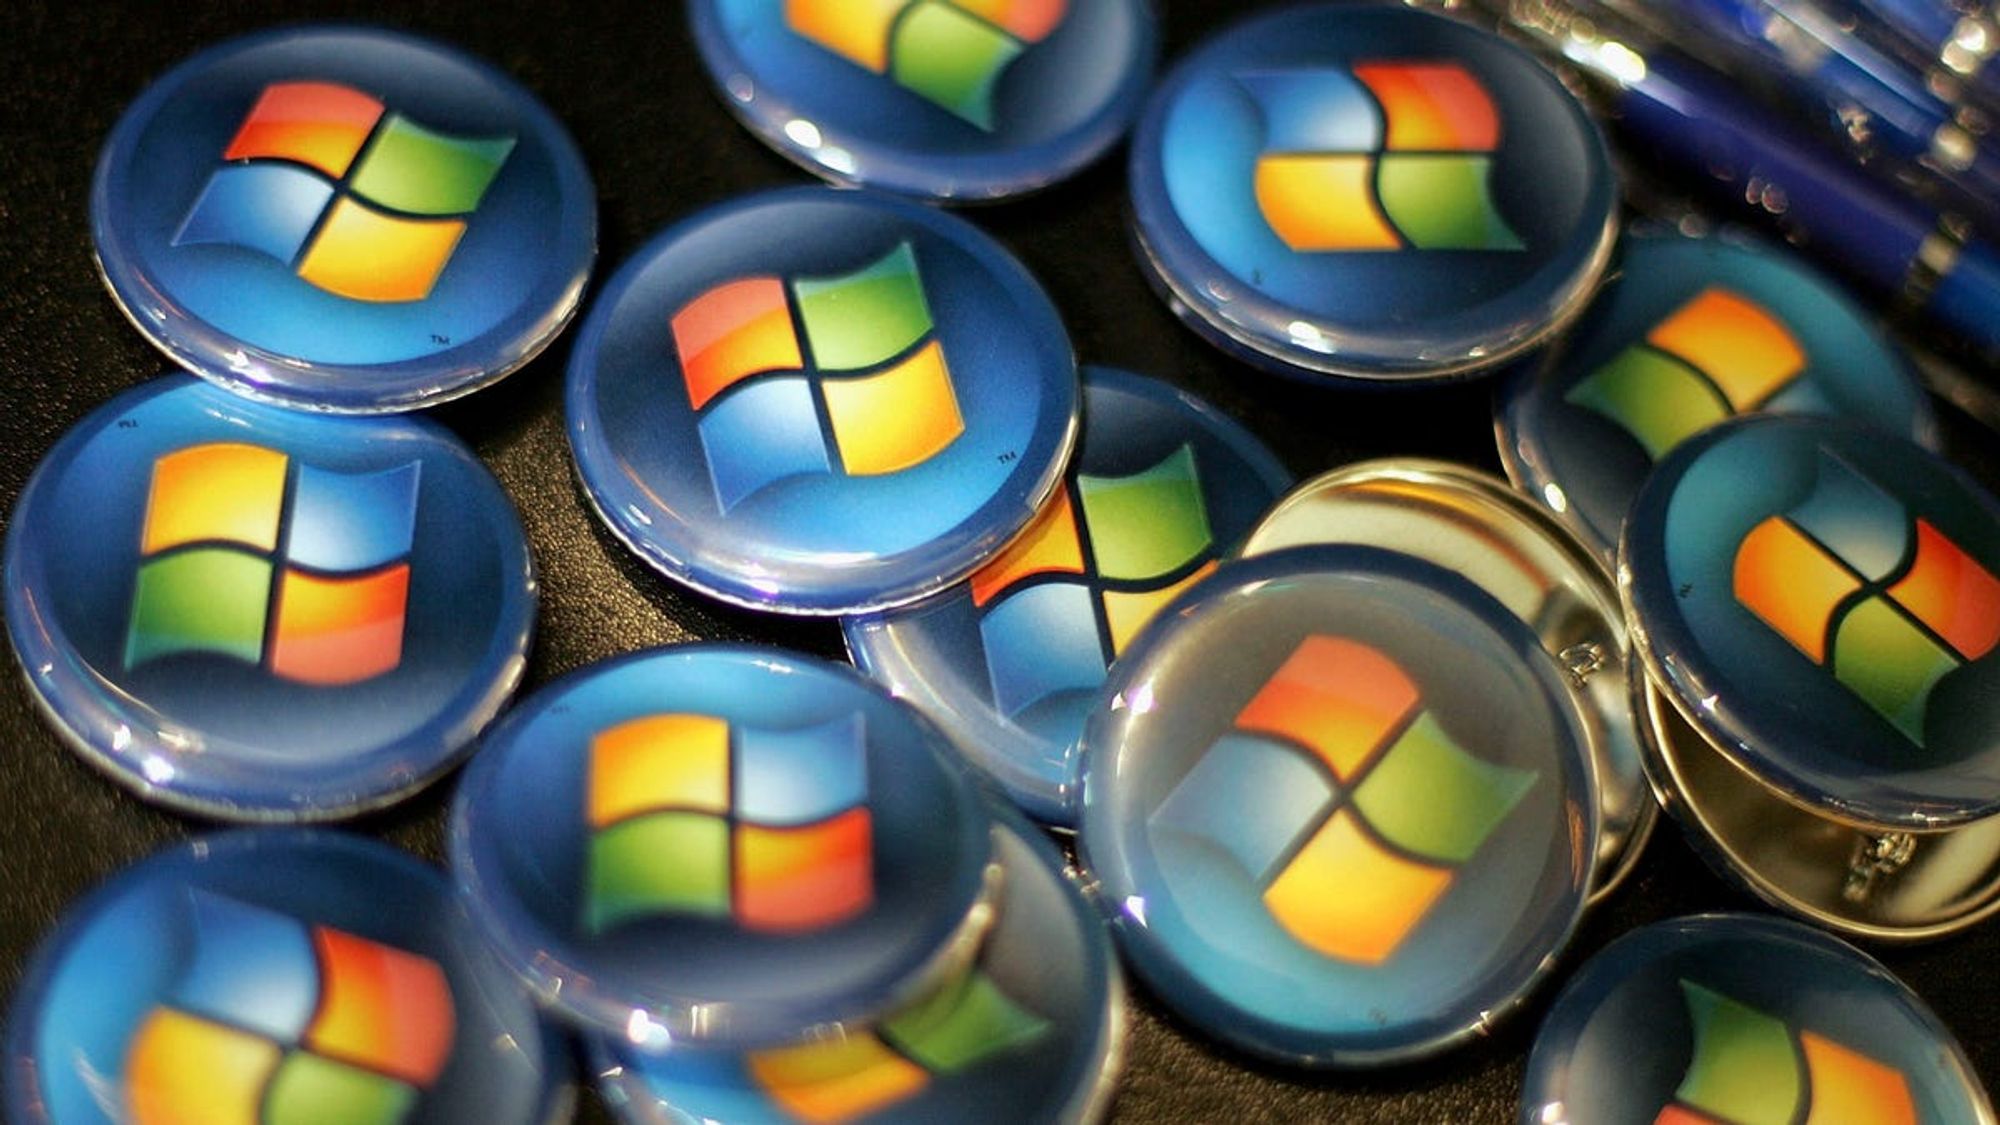 Microsoft Is the First Big Company to Commit to Right to Repair